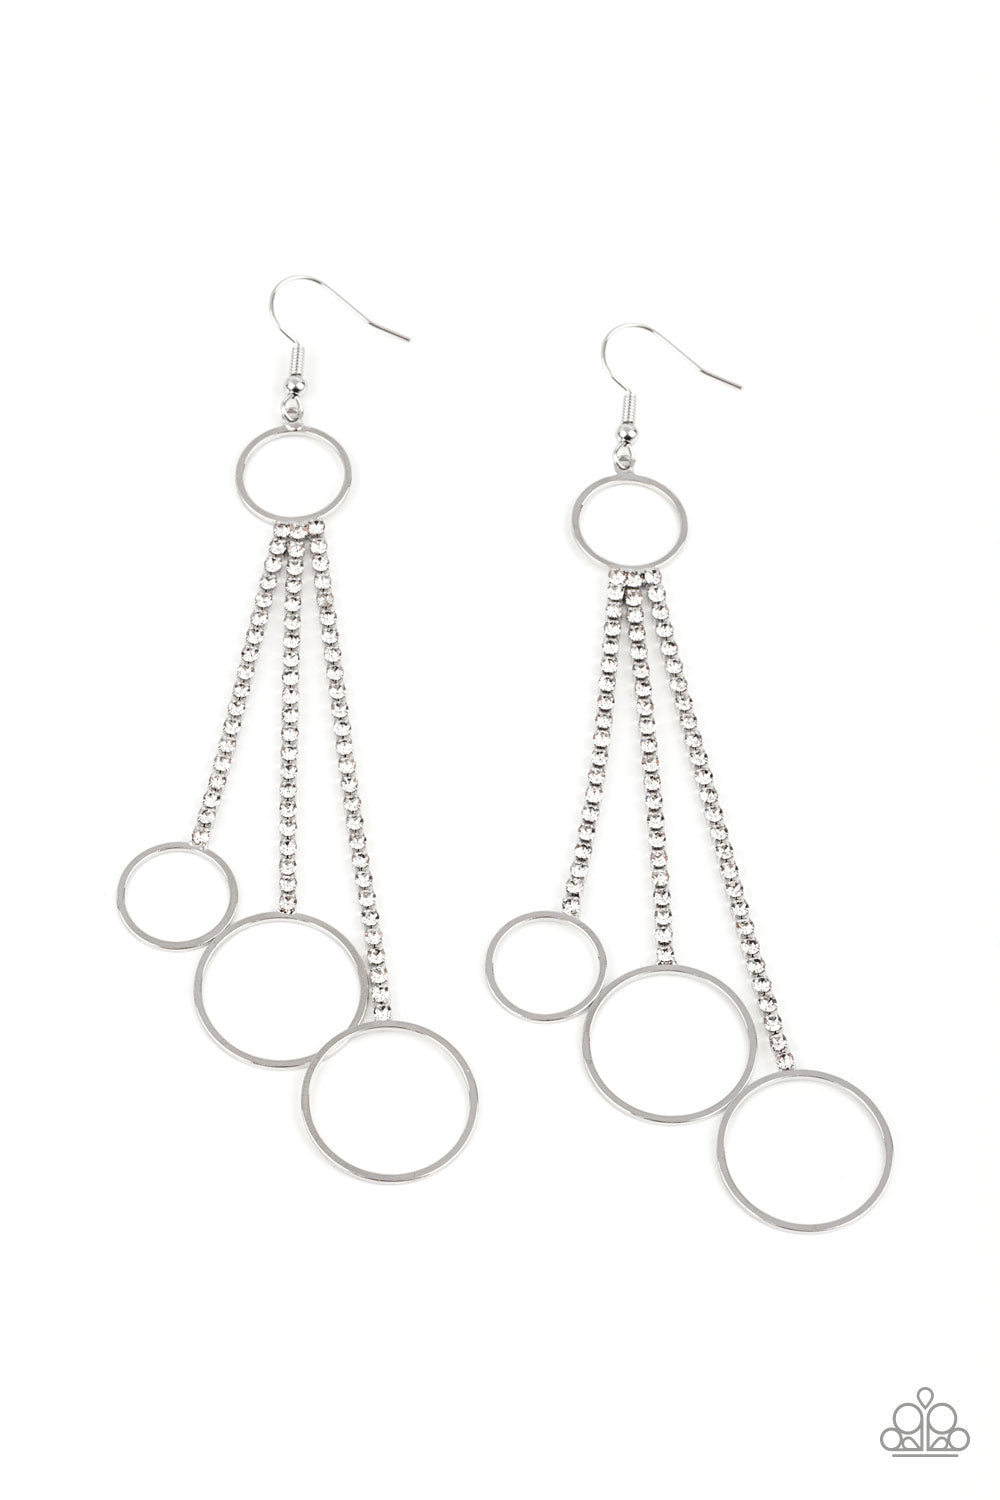 Demurely Dazzling White Earring - Paparazzi Accessories  Dainty silver hoops swing from the bottom of glittery strands of glassy white rhinestones that attach to the bottom of a dainty silver ring, creating a tantalizing tassel. Earring attaches to a standard fishhook fitting.  All Paparazzi Accessories are lead free and nickel free!  Sold as one pair of earrings.